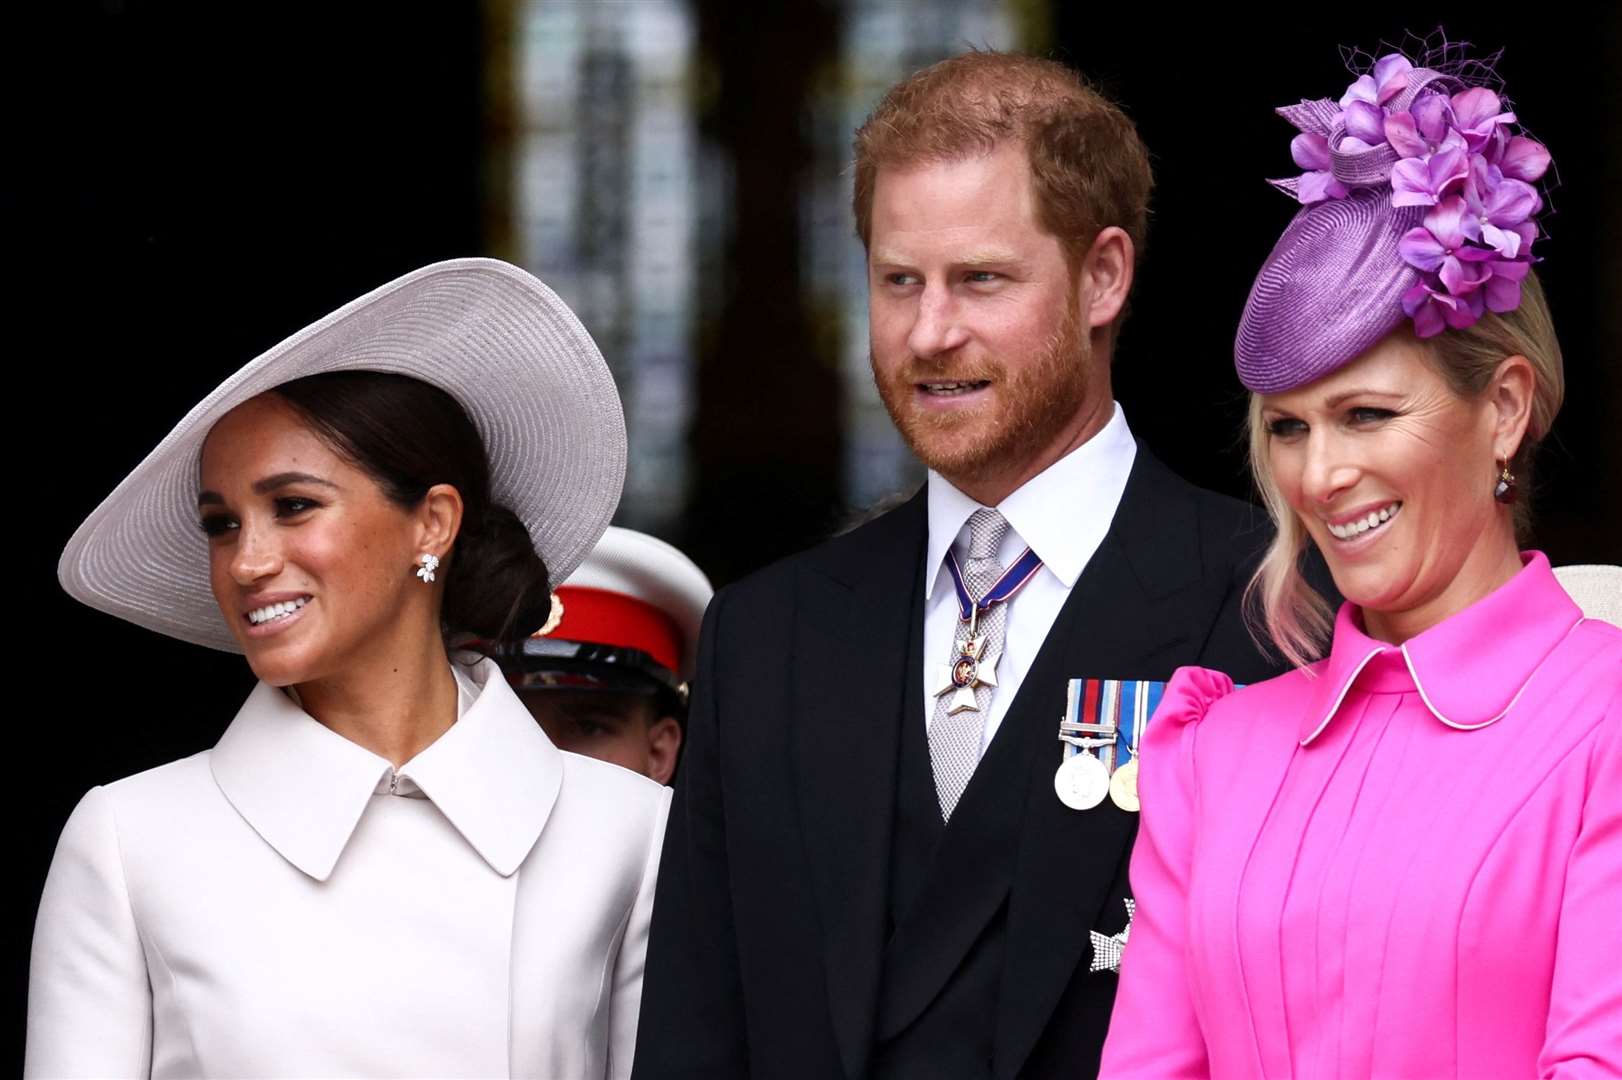 The Duke and Duchess of Sussex and Zara Tindall leaving the service (Henry Nicholls/PA)